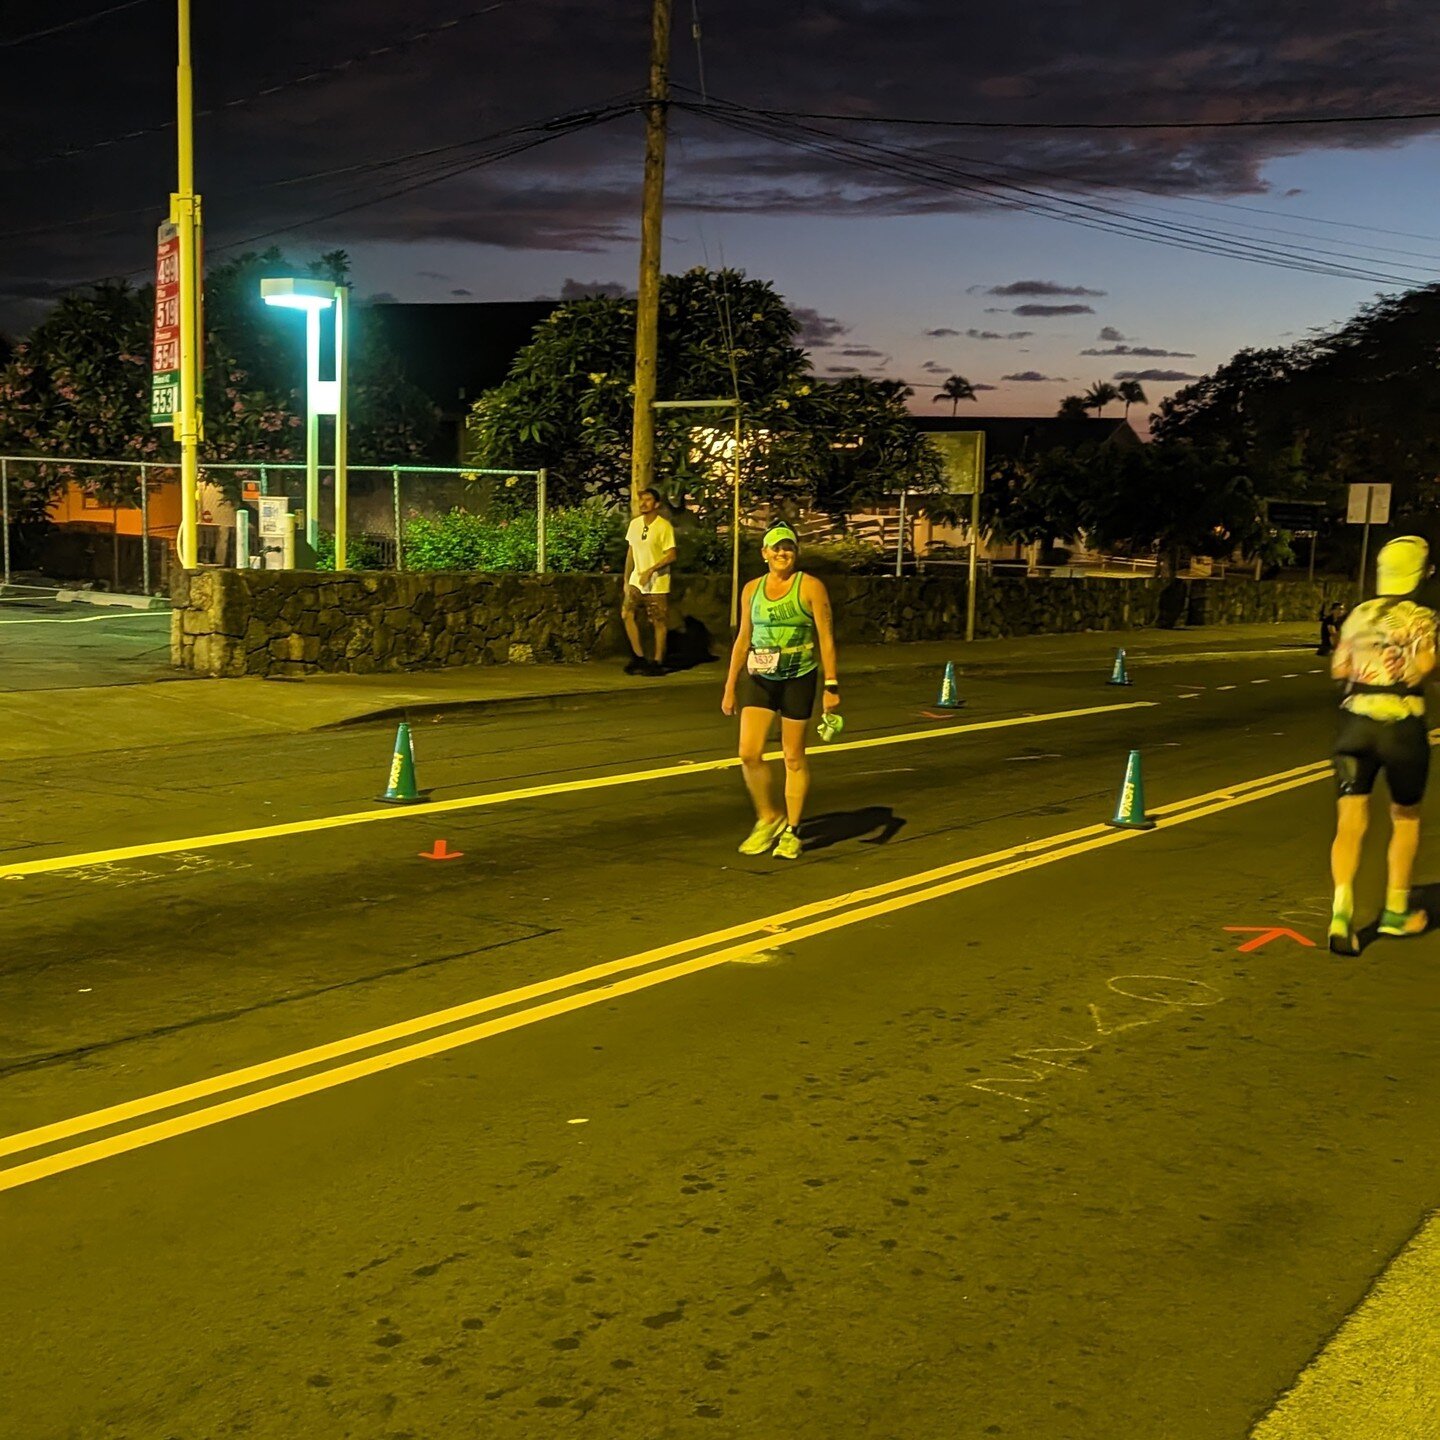 [Follow me back to Kona. I'm writing about my race experience on the blog, but thought I'd share it here, too.]

I&rsquo;ll be back in a few hours, I called out. At this point, I had 20 miles to go.

I walked up the steep hill at Palani and then ran 